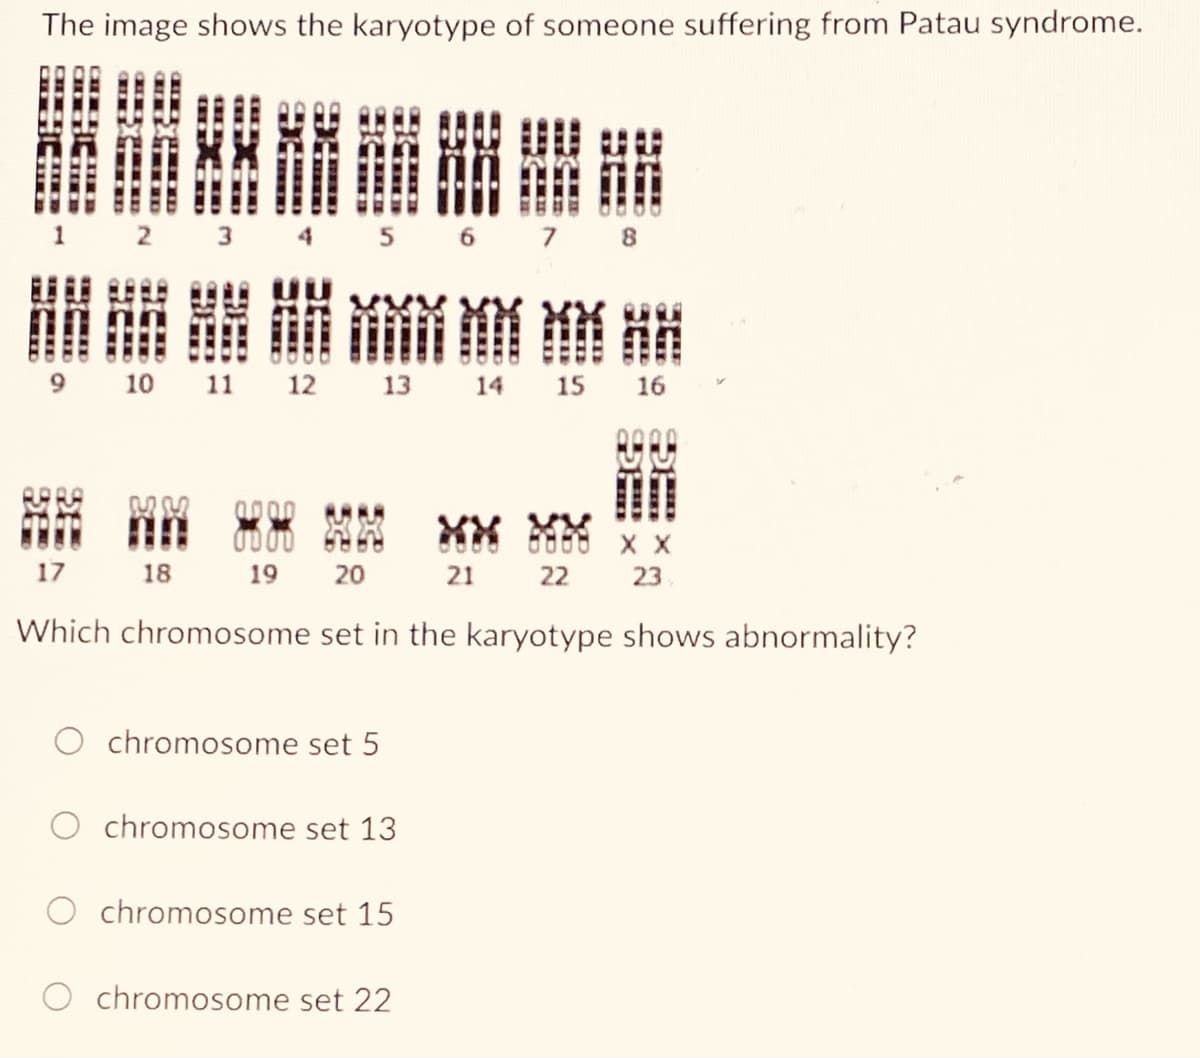 The image shows the karyotype of someone suffering from Patau syndrome.
1
2 3 4 5 6
7 8
開講罪崩崩崩销
10
11
12
13
14
15
16
17
18
19
20
21
22
23
Which chromosome set in the karyotype shows abnormality?
chromosome set 5
chromosome set 13
O chromosome set 15
chromosome set 22
